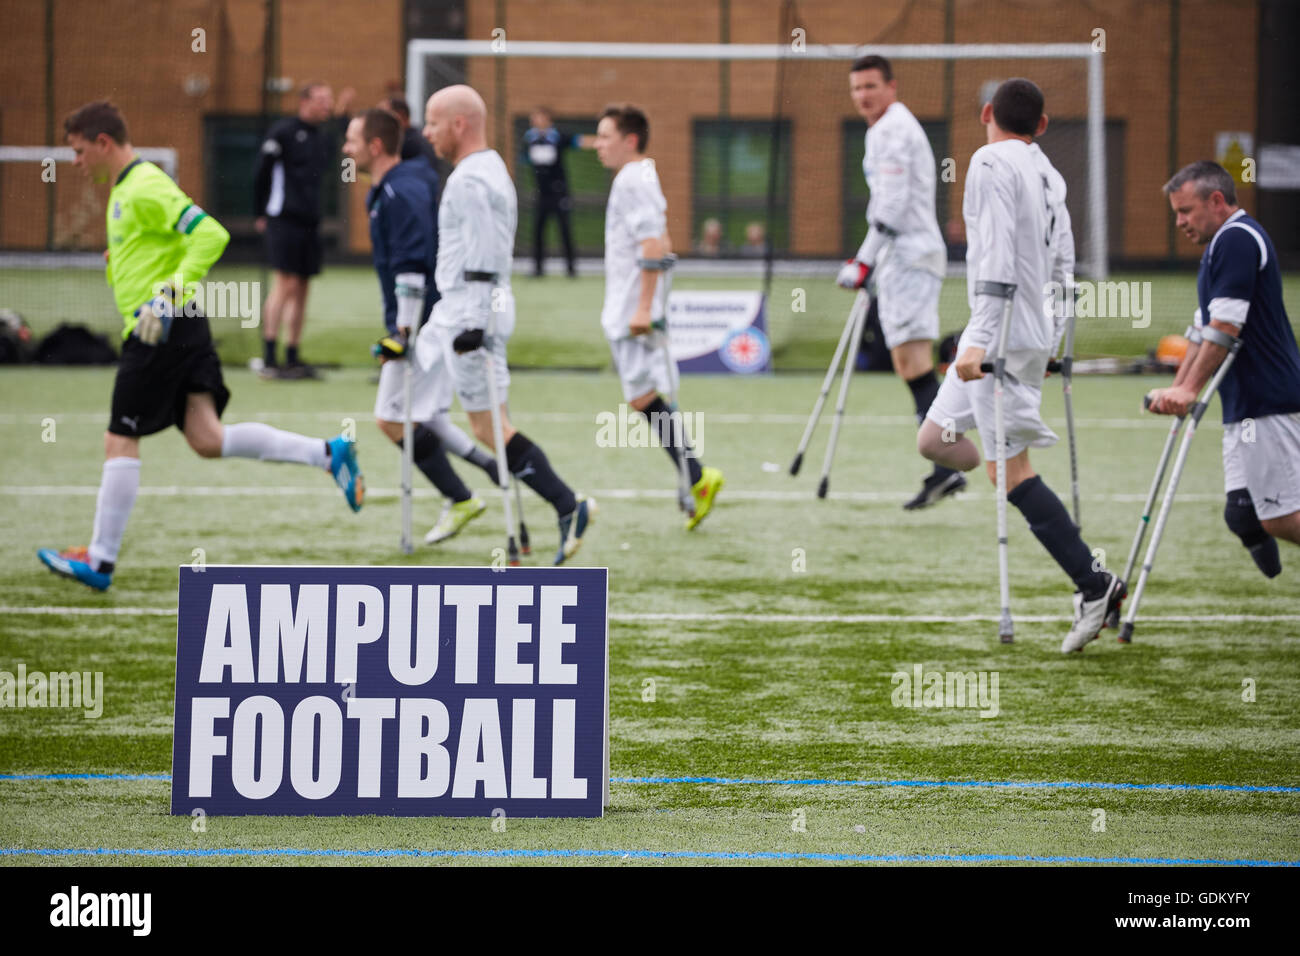 EAFA Takeda League Cup  Portway Lifestyle Centre, Oldbury, Birmingham Amputee football is an disabled sport played Outfield play Stock Photo